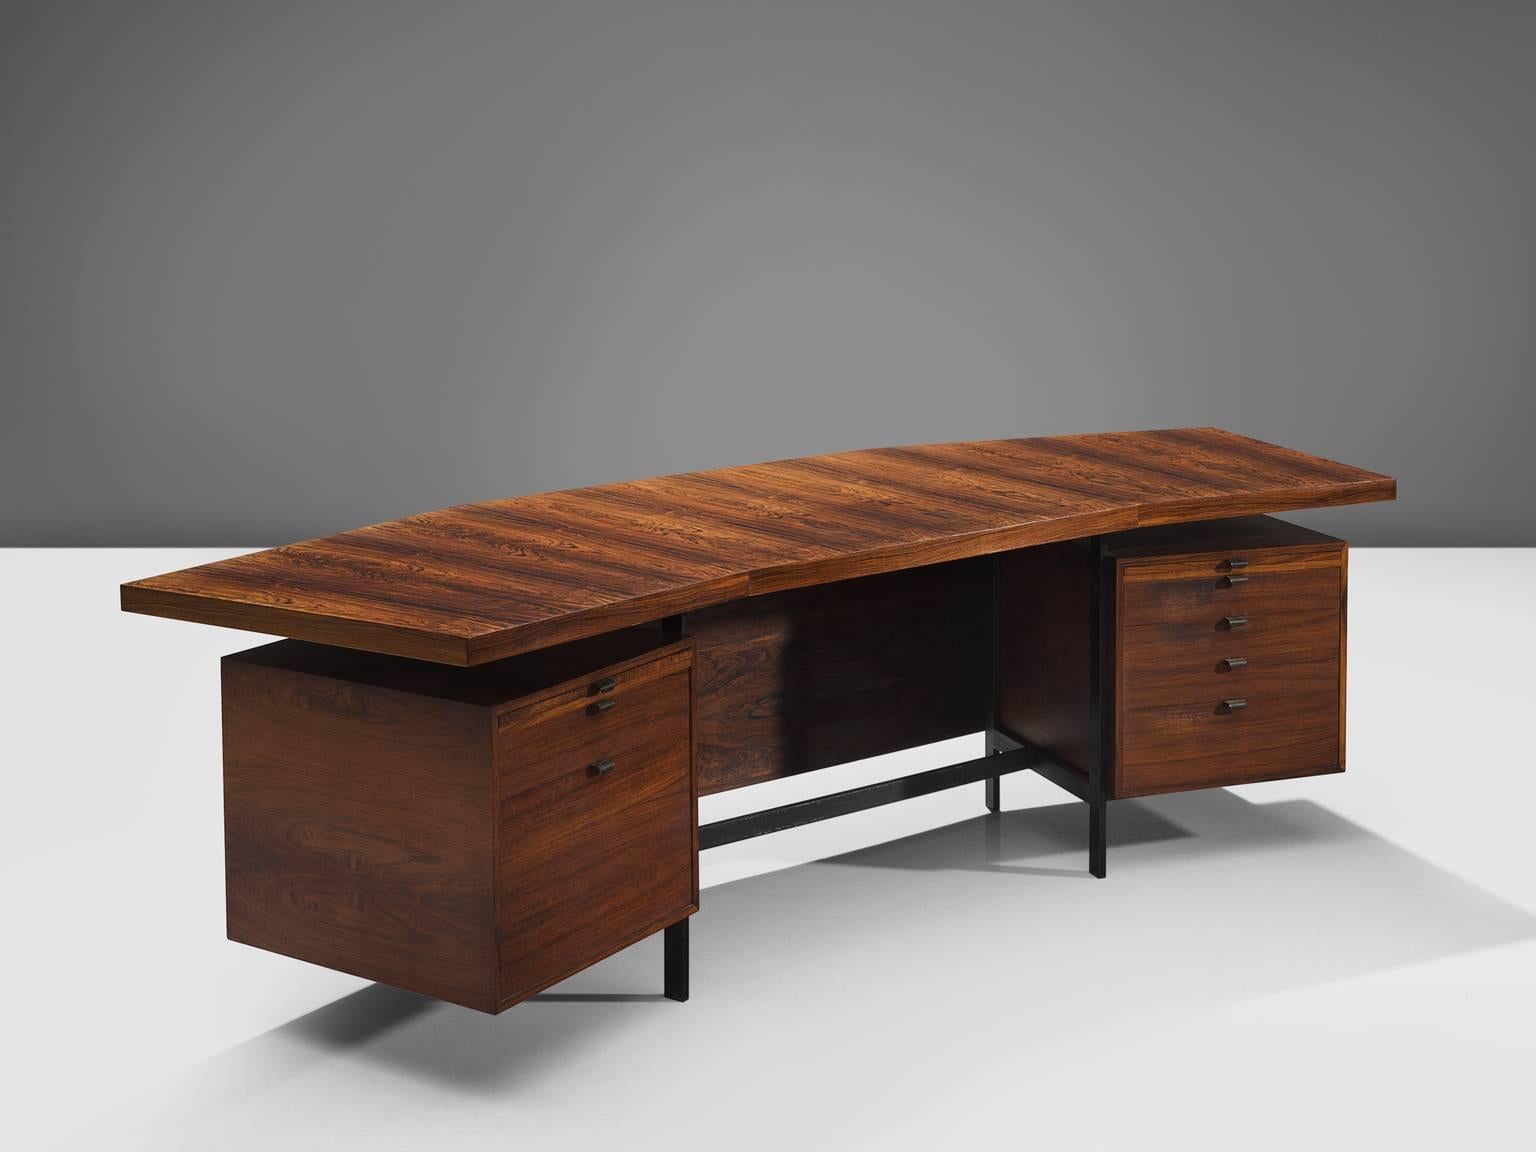 Executive desk, rosewood, metal, Italy, circa 1950.

This executive desk is attributed to Osvaldo Borsani. It has the characteristic features such as the angled top and the black leather back. The frame is executed in black metal and the detailing